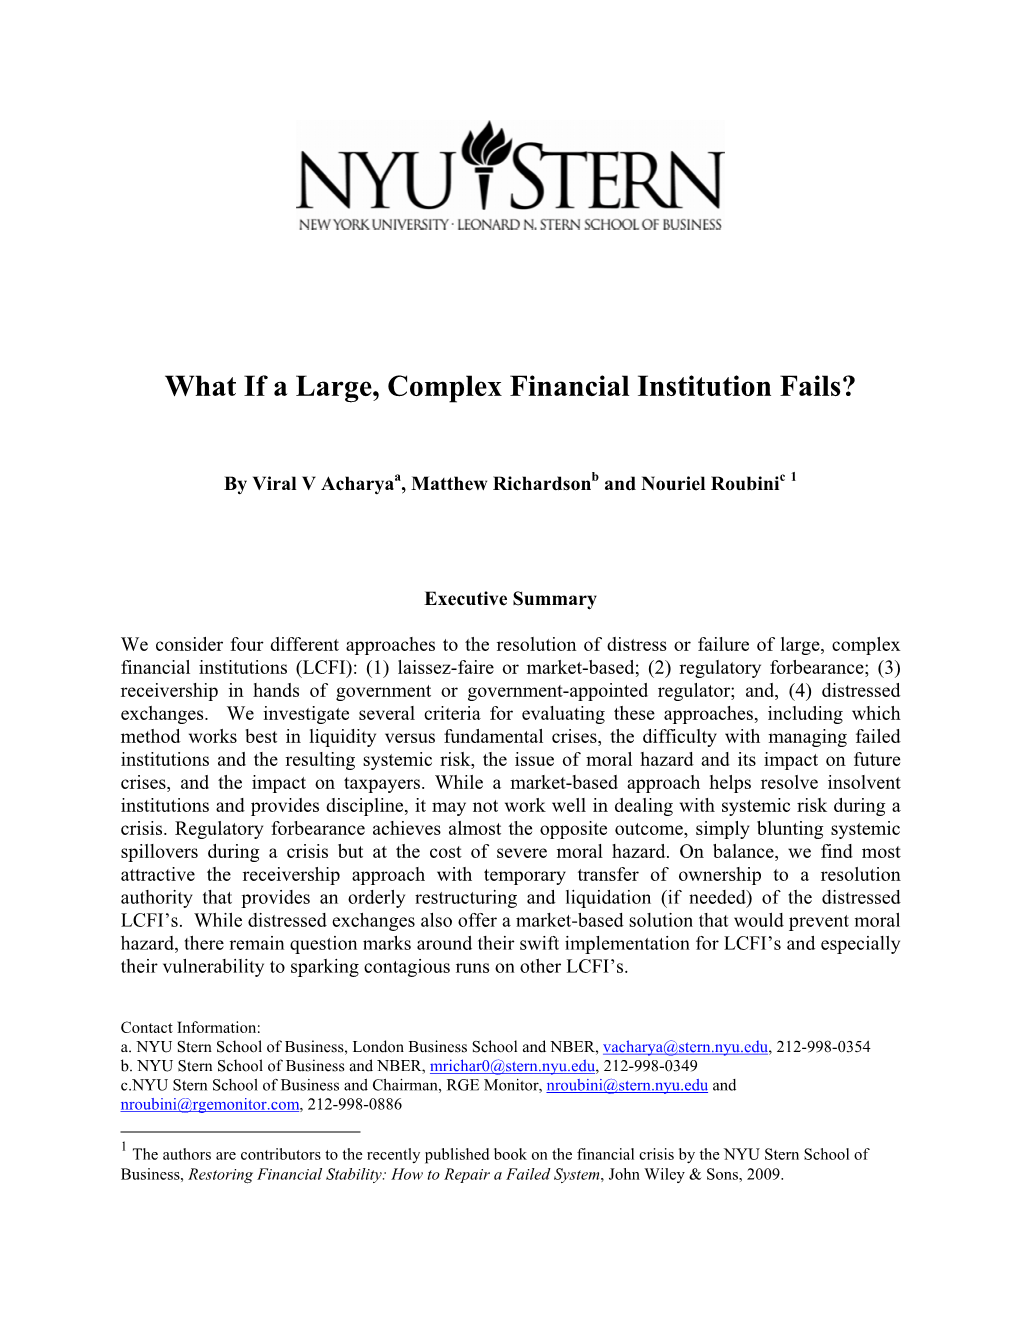 What If a Large, Complex Financial Institution Fails?